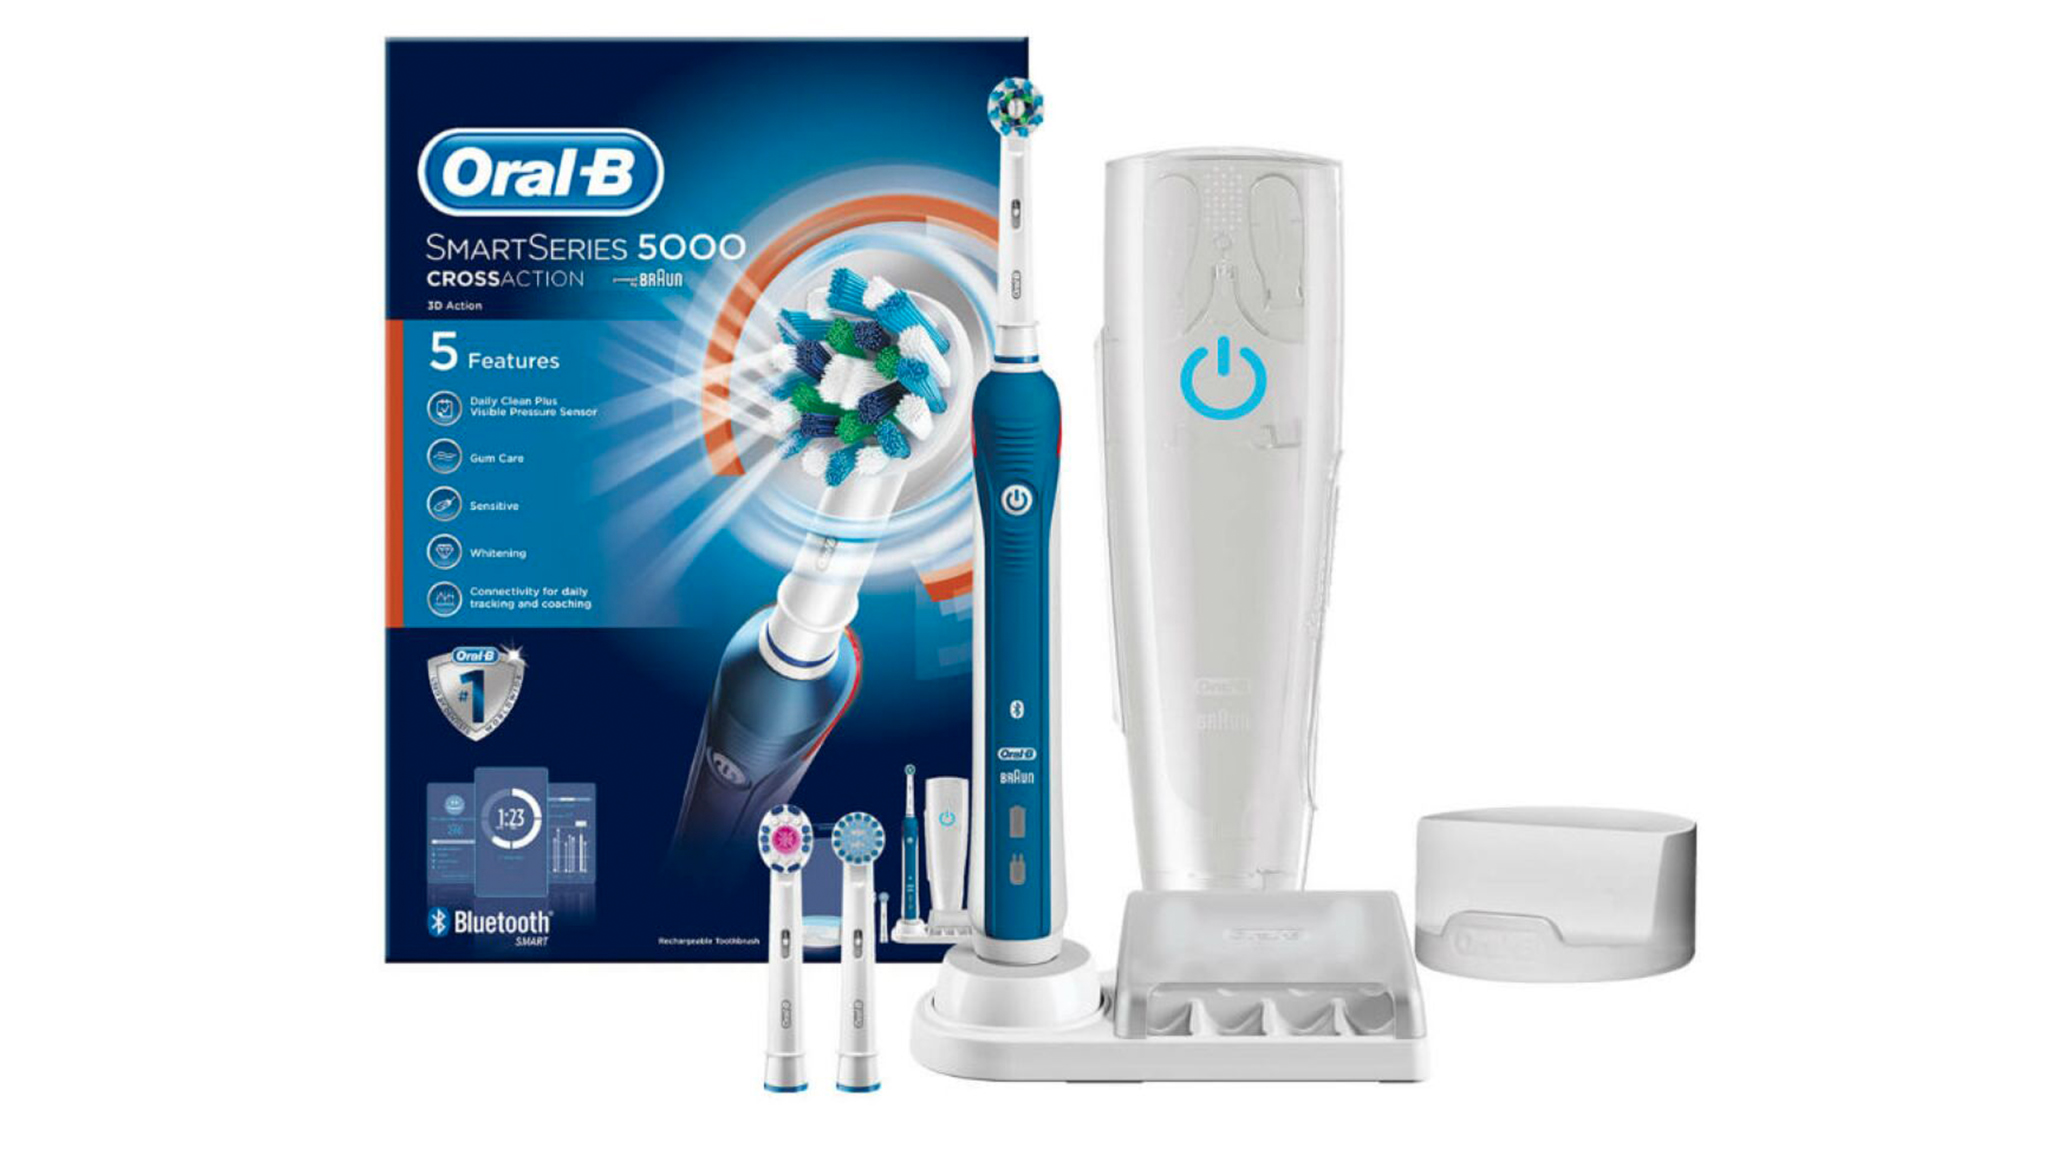 Oral-B CrossAction Smart 5 DUO 5900 Electric Toothbrush Set